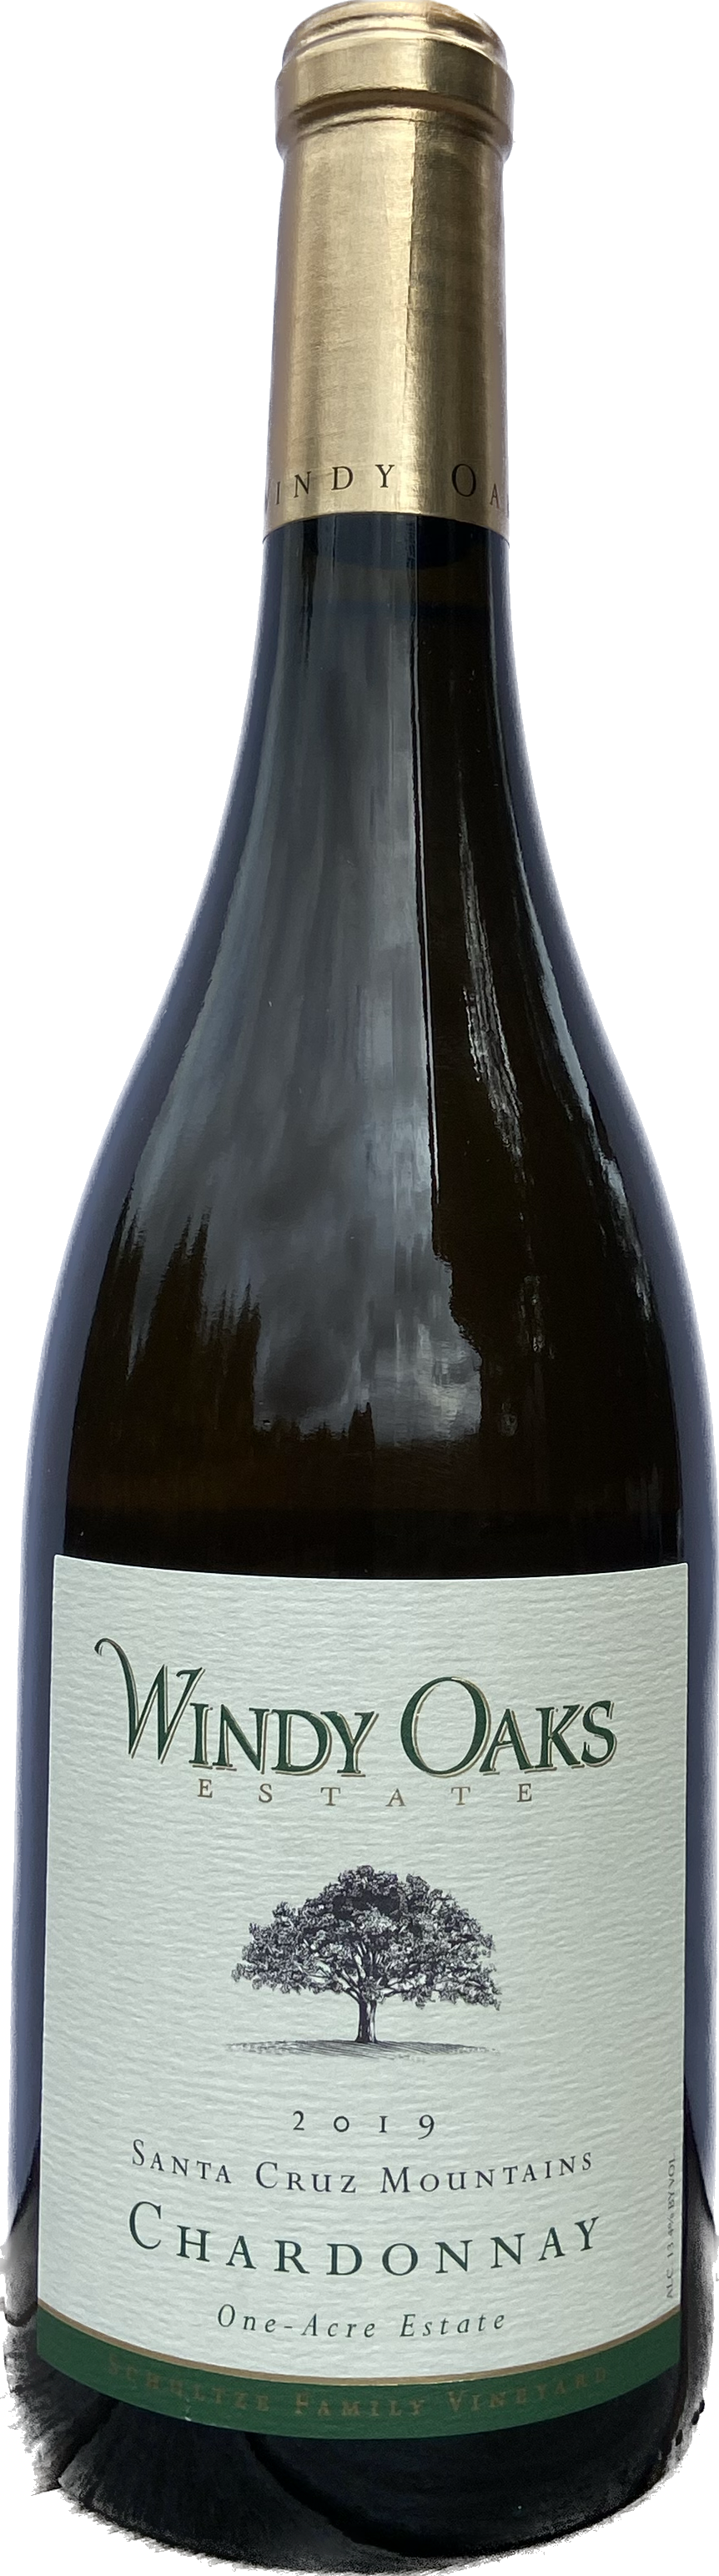 Product Image for 2019 Estate Chardonnay, One-Acre